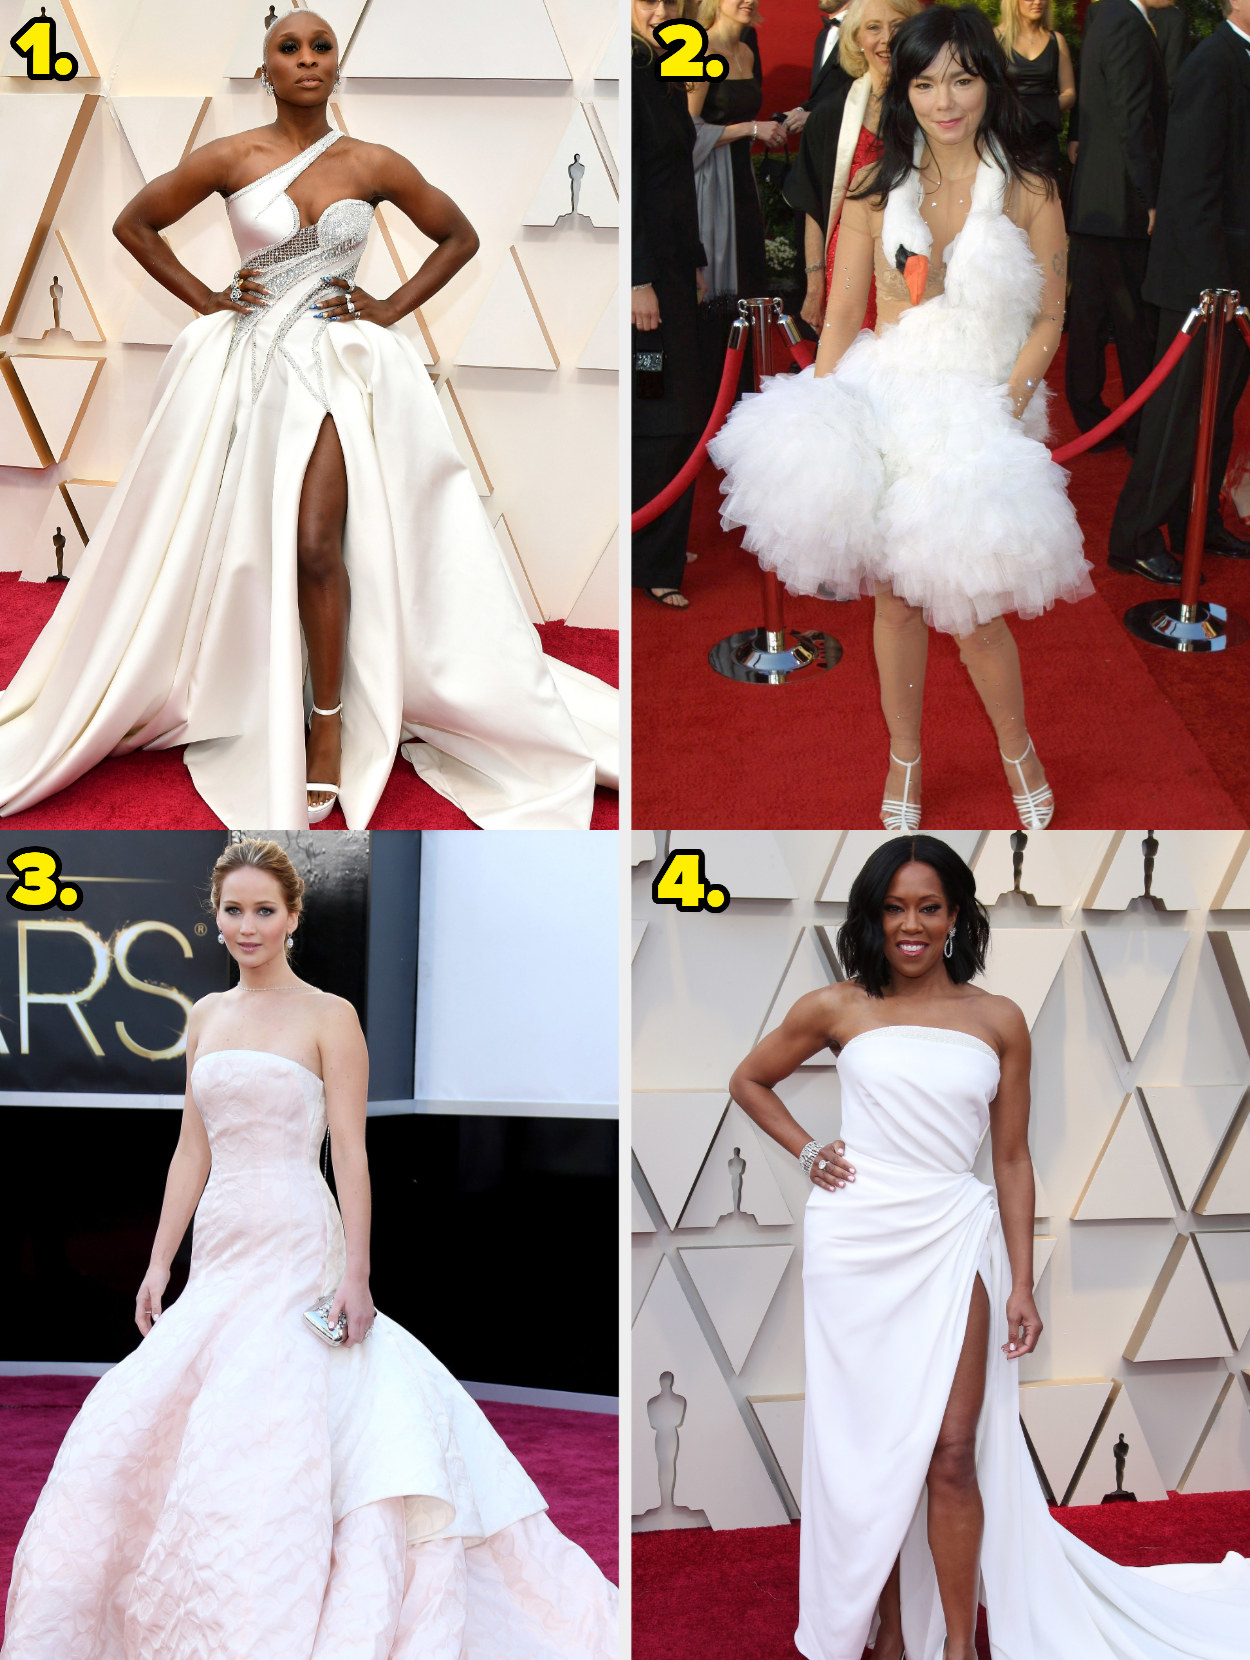 1. Cynthia Erivo wears an asymmetrical ball gown with silver detailing. 2. Bjork wears a short gown that has feathers and a swan head wrapped around her neck. 3. Jennifer Lawrence wears a simple ballgown. 4. Regina King wears a strapless gown with a slit